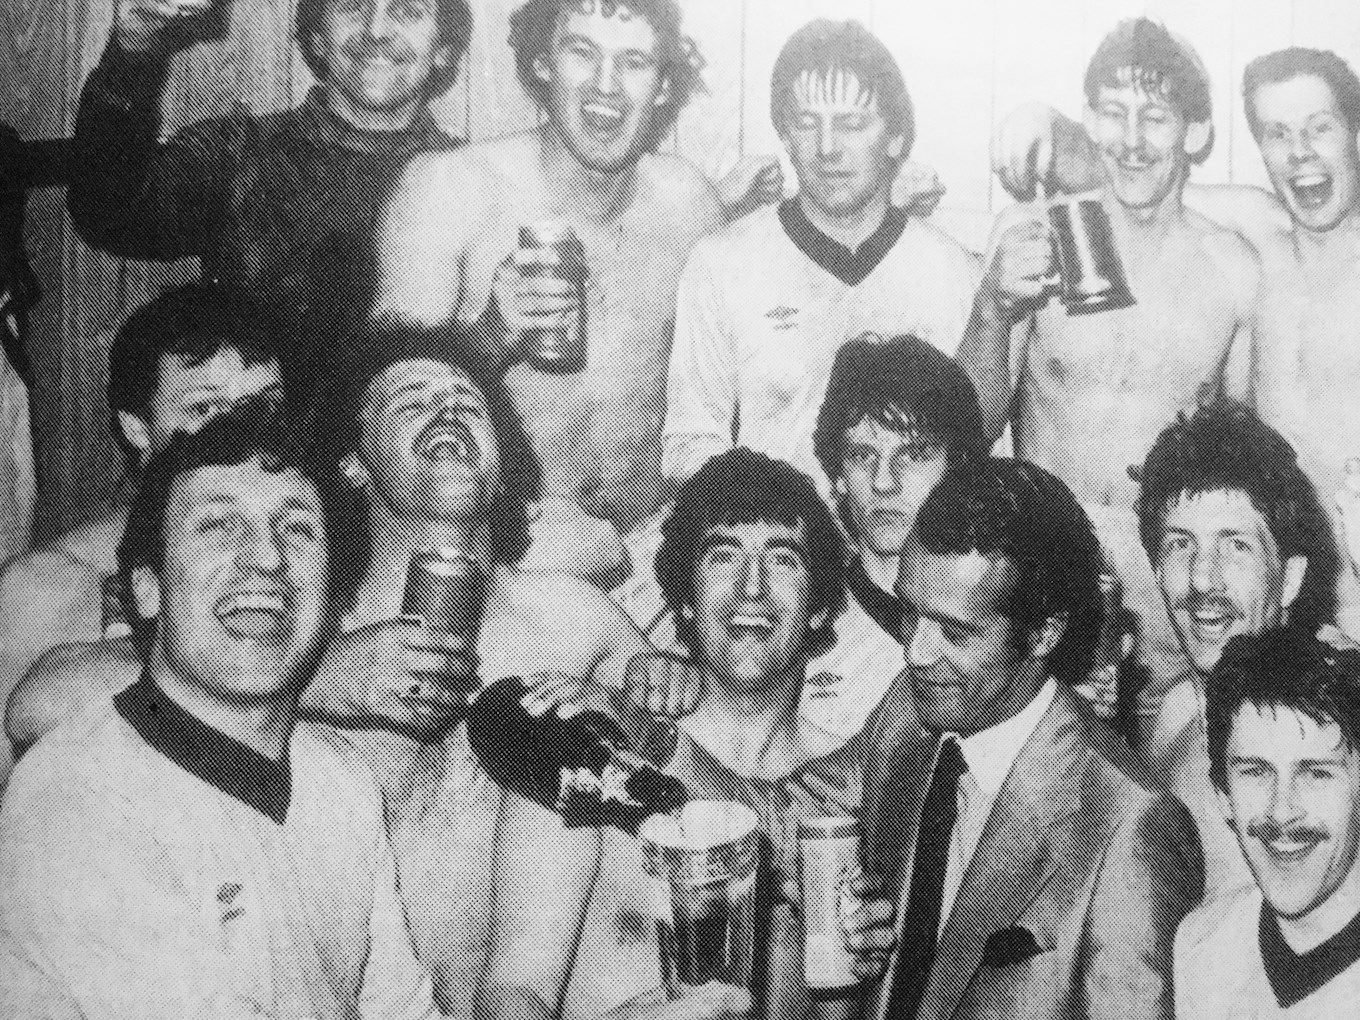 Burton Albion manager Neil Warnock and Chairman Ben Robinson, with the first team squad, celebrate winning the Northern Premier League Cup in 1983.